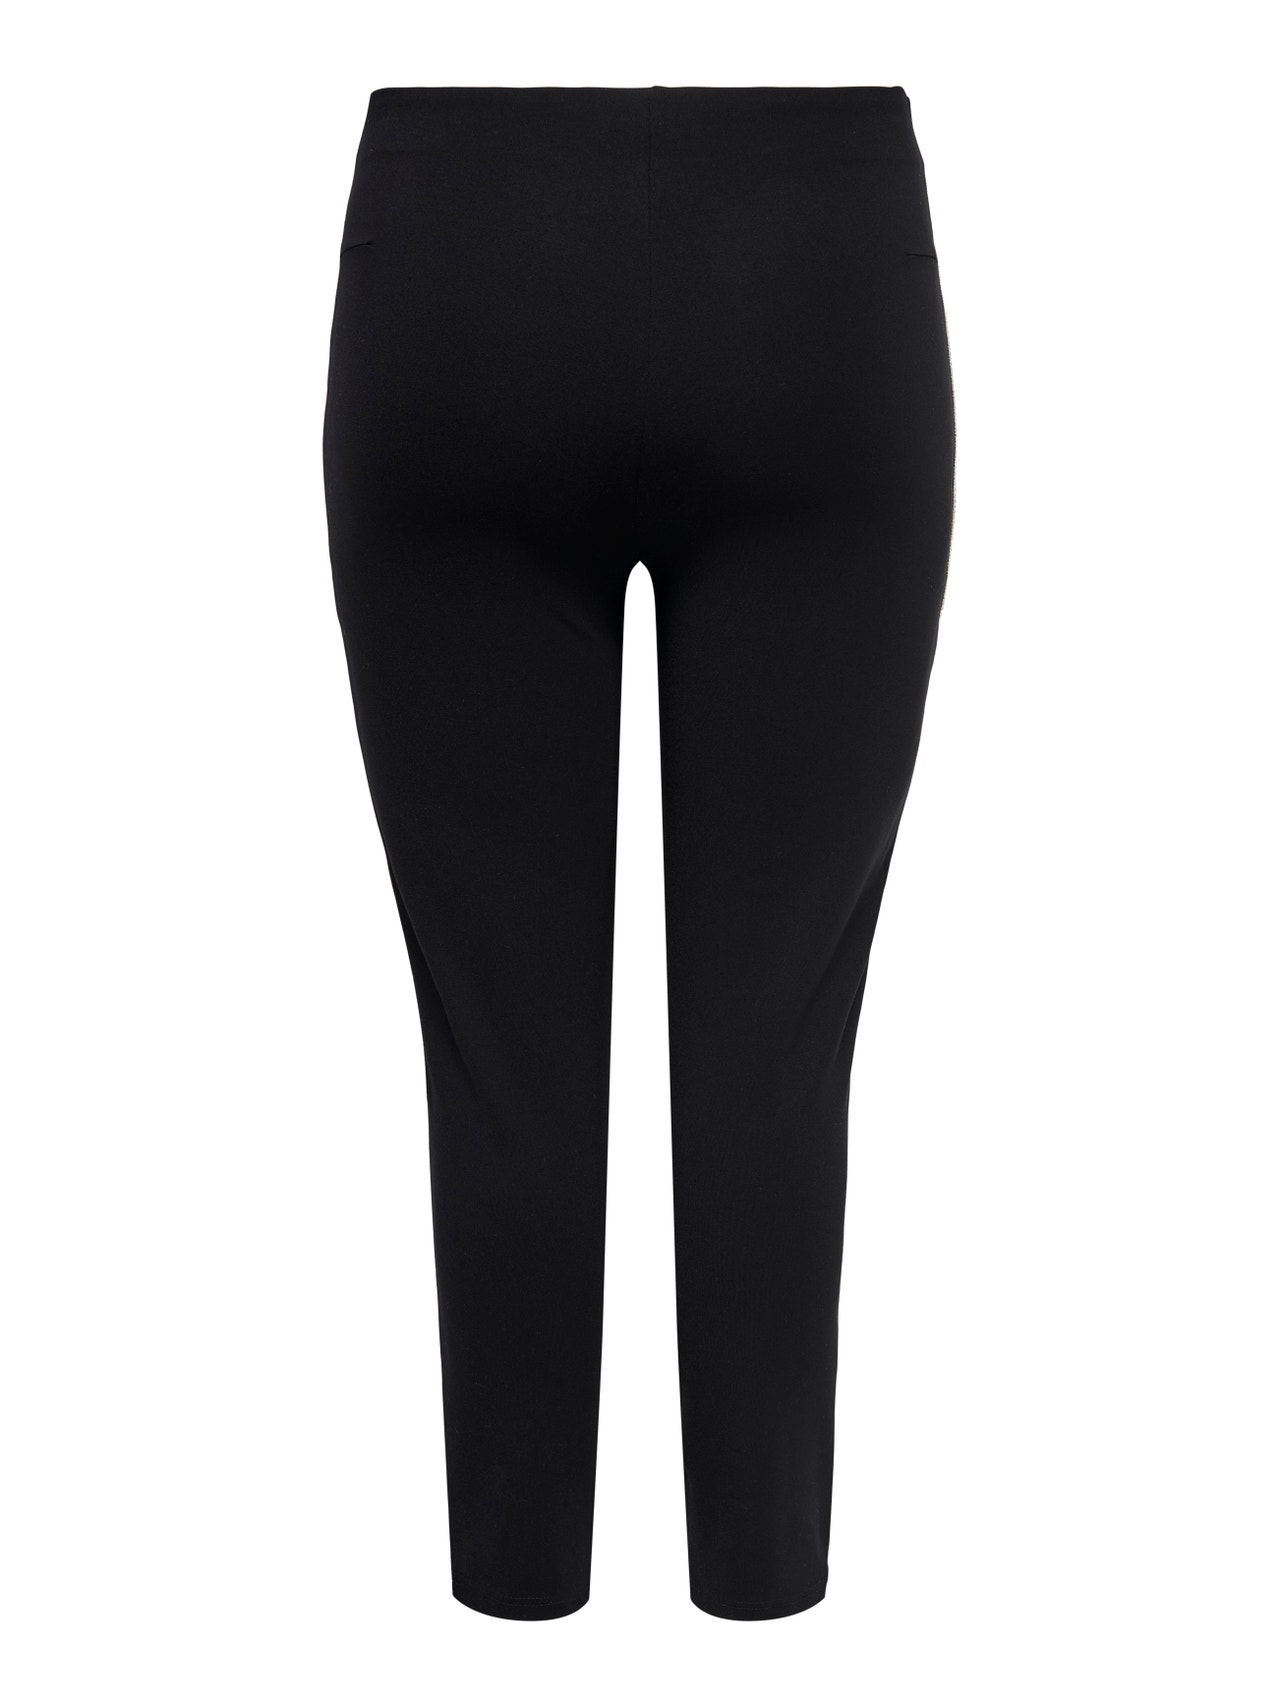 Curvy solid color leggings with 20% discount!